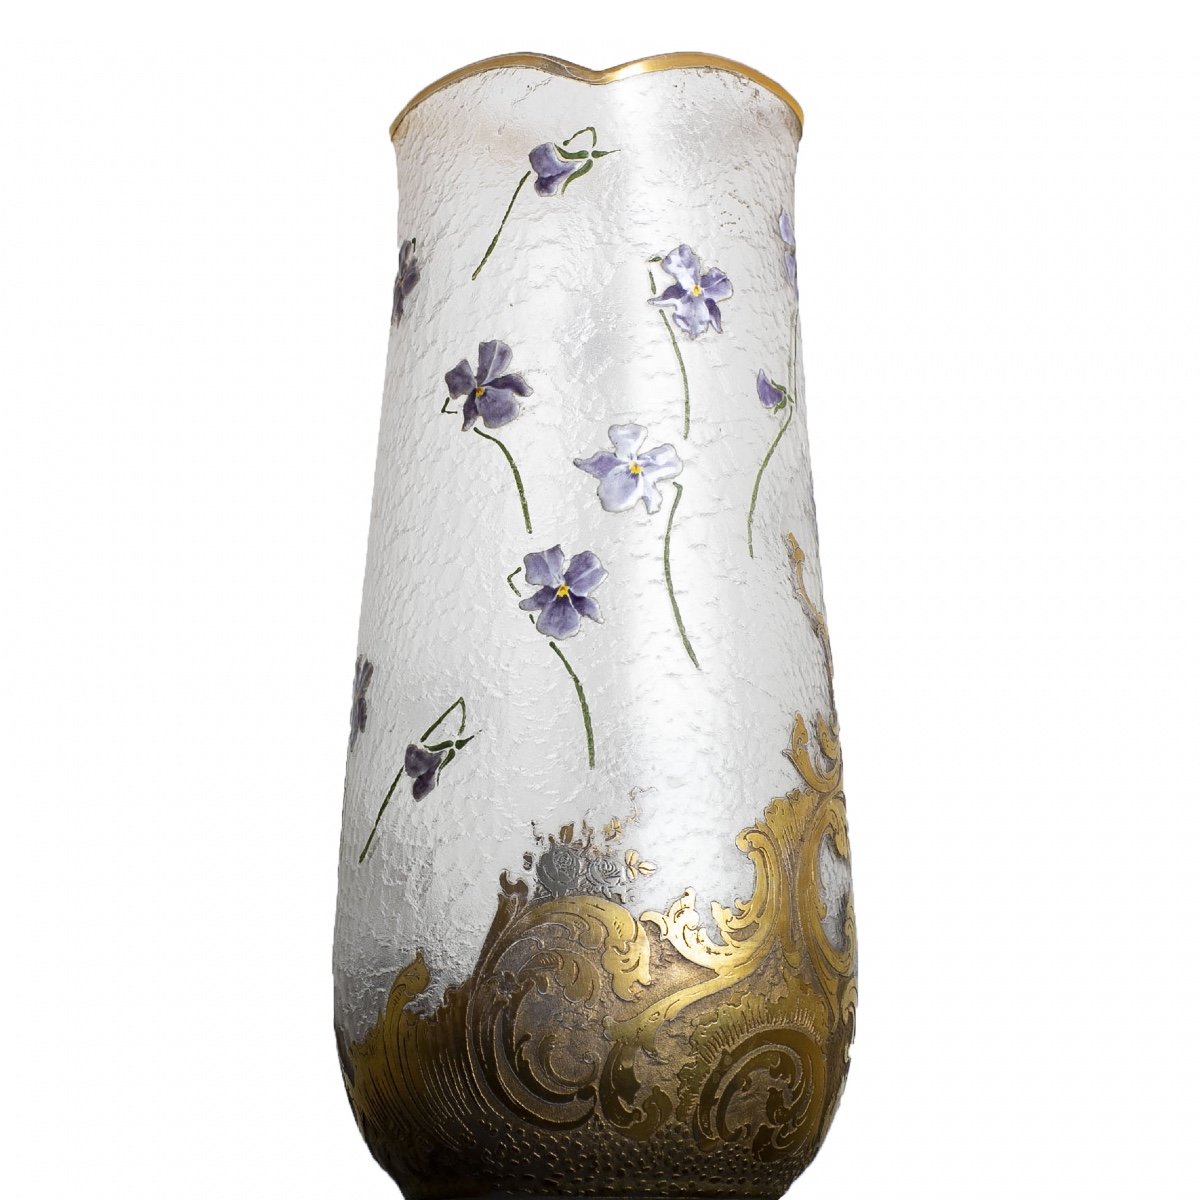 Pair Of Large Vases With Violets By Montjoye Legras 1900 - Art Nouveau-photo-4